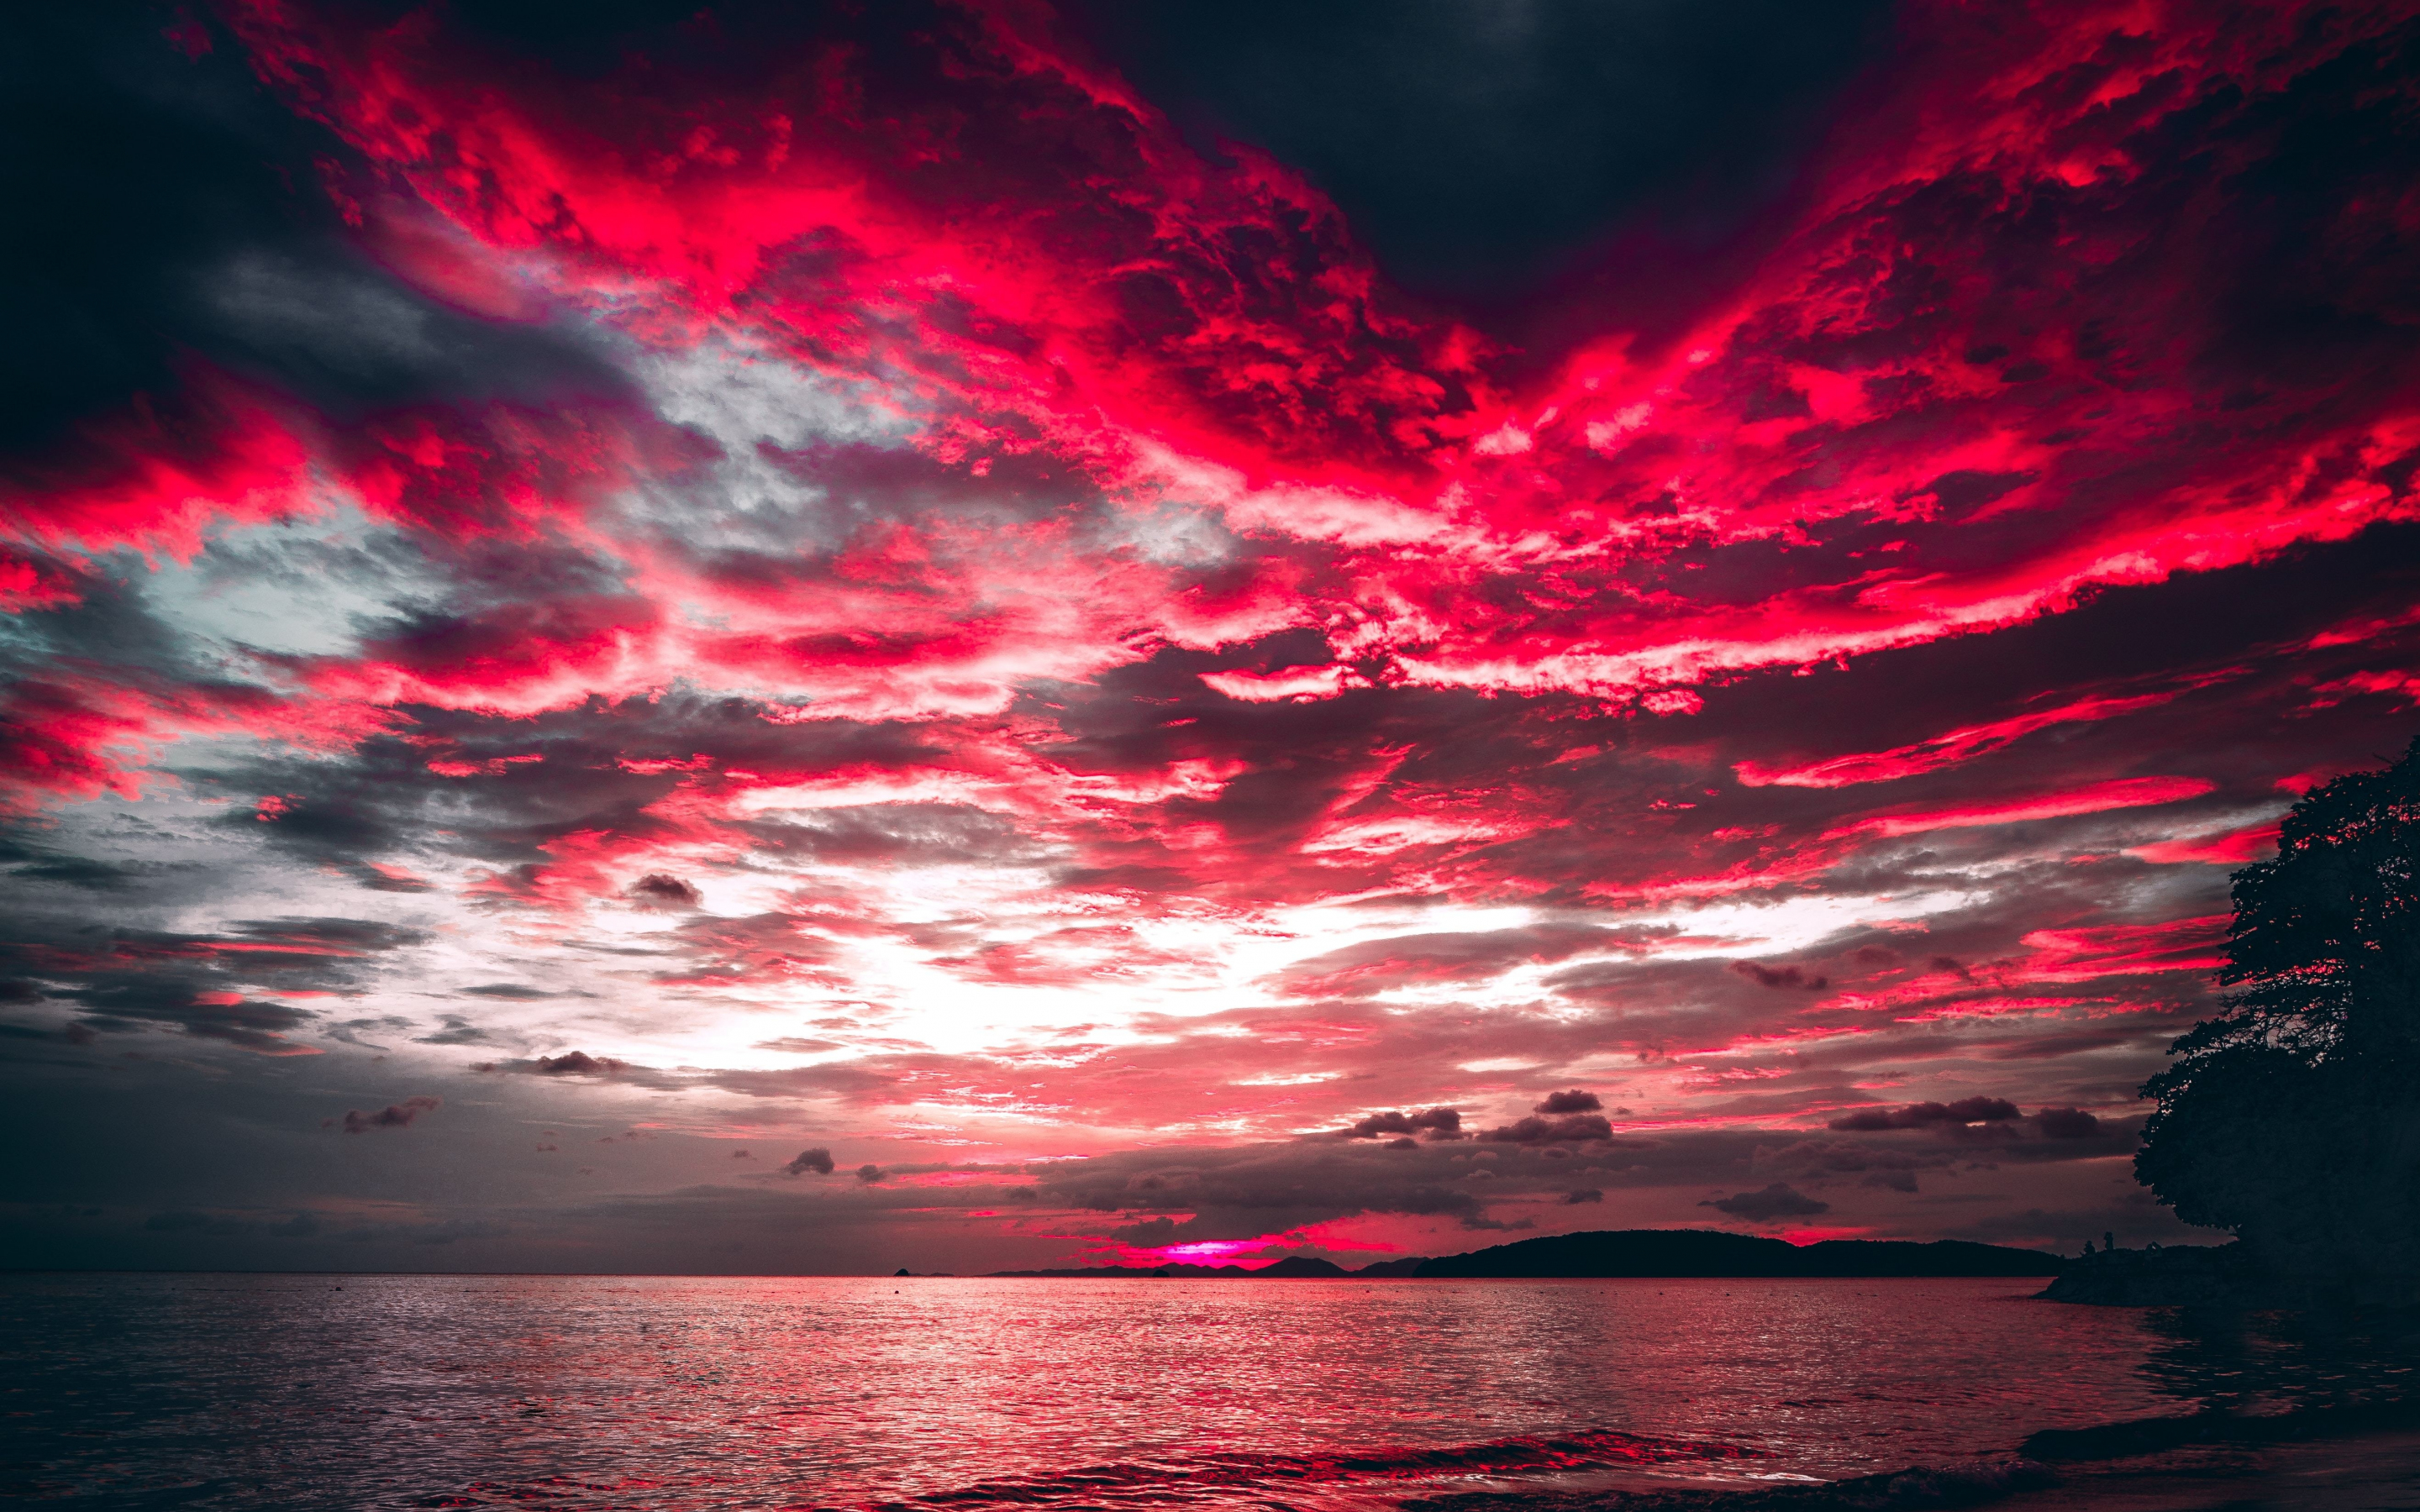 Sea, sunset, red clouds, nature, 2880x1800 wallpaper